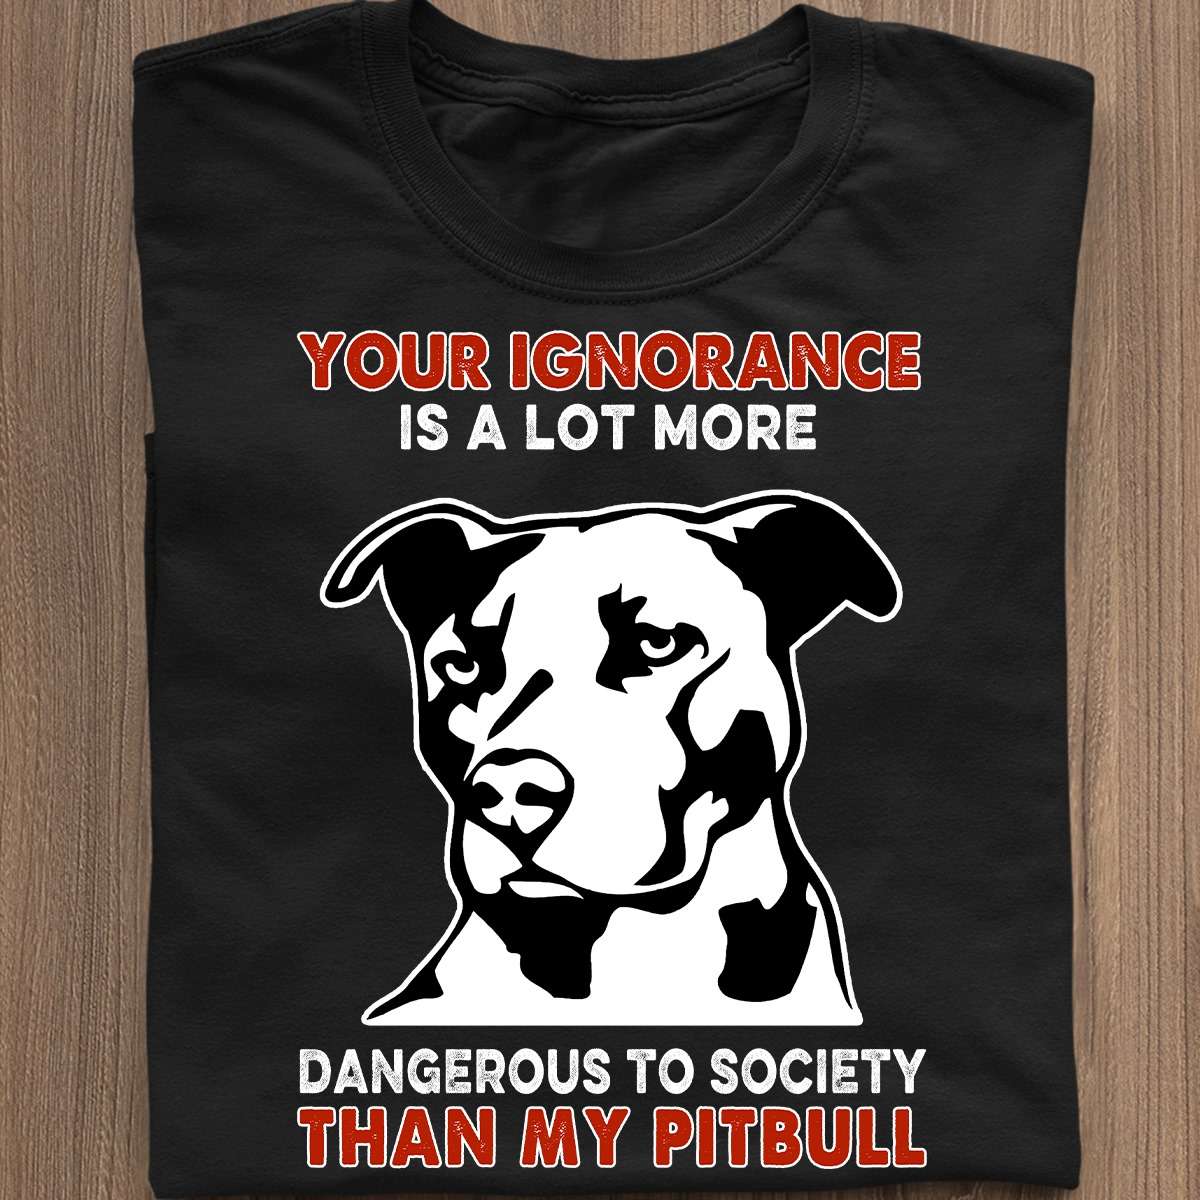 Your ignorance is a lot more dangerous to society than my pitbull - Pitbull dog owner gift